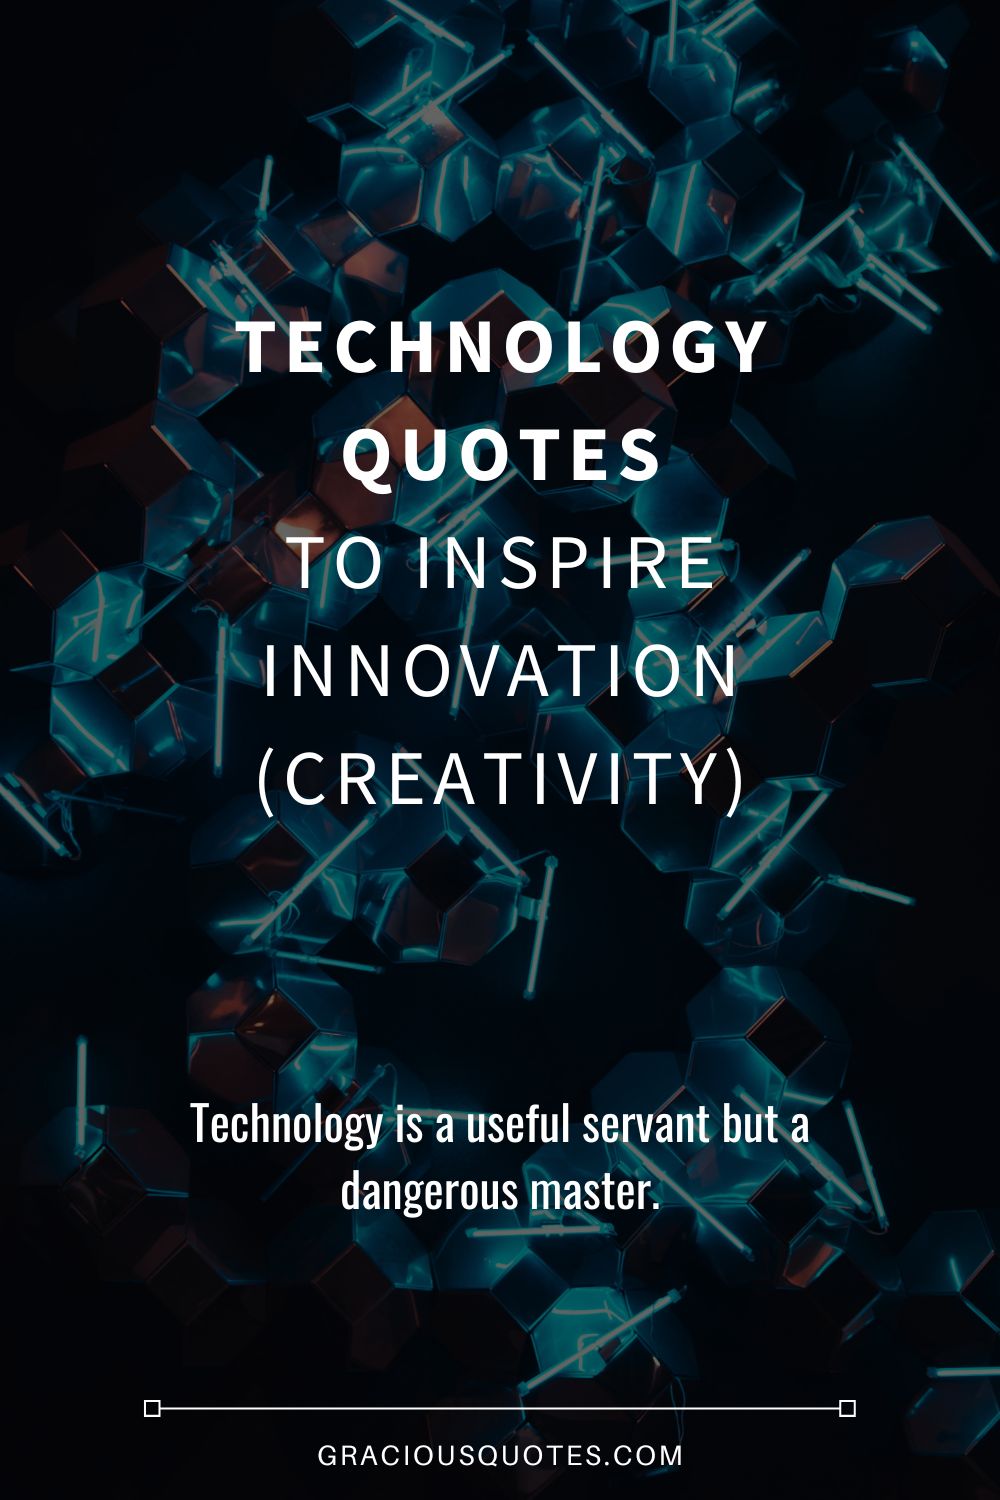 Technology Quotes to Inspire Innovation (CREATIVITY) - Gracious Quotes